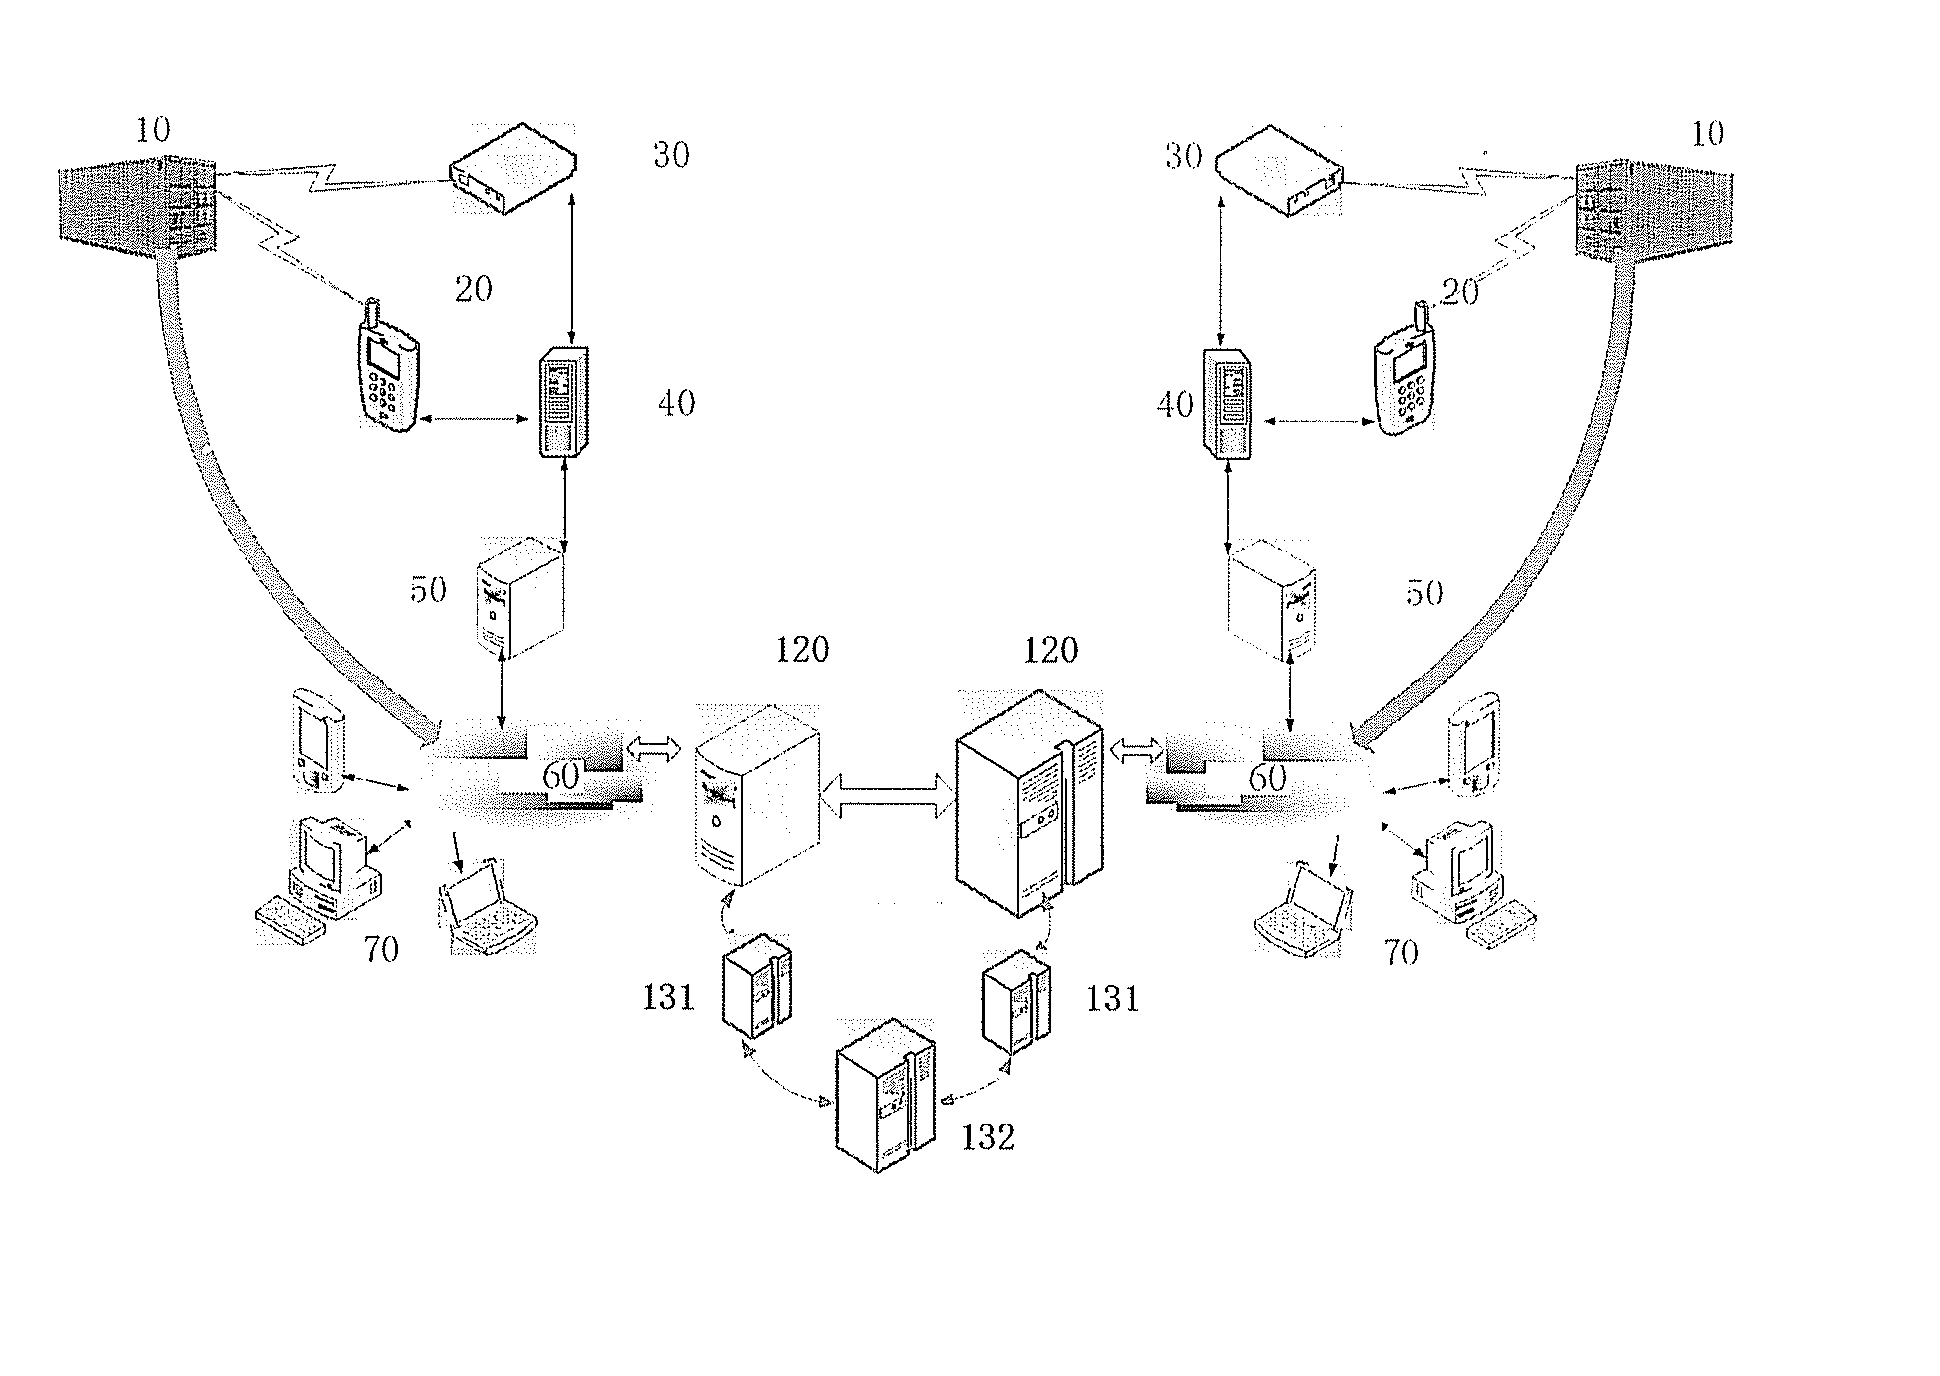 Method and system for tracking and managing cargo containers